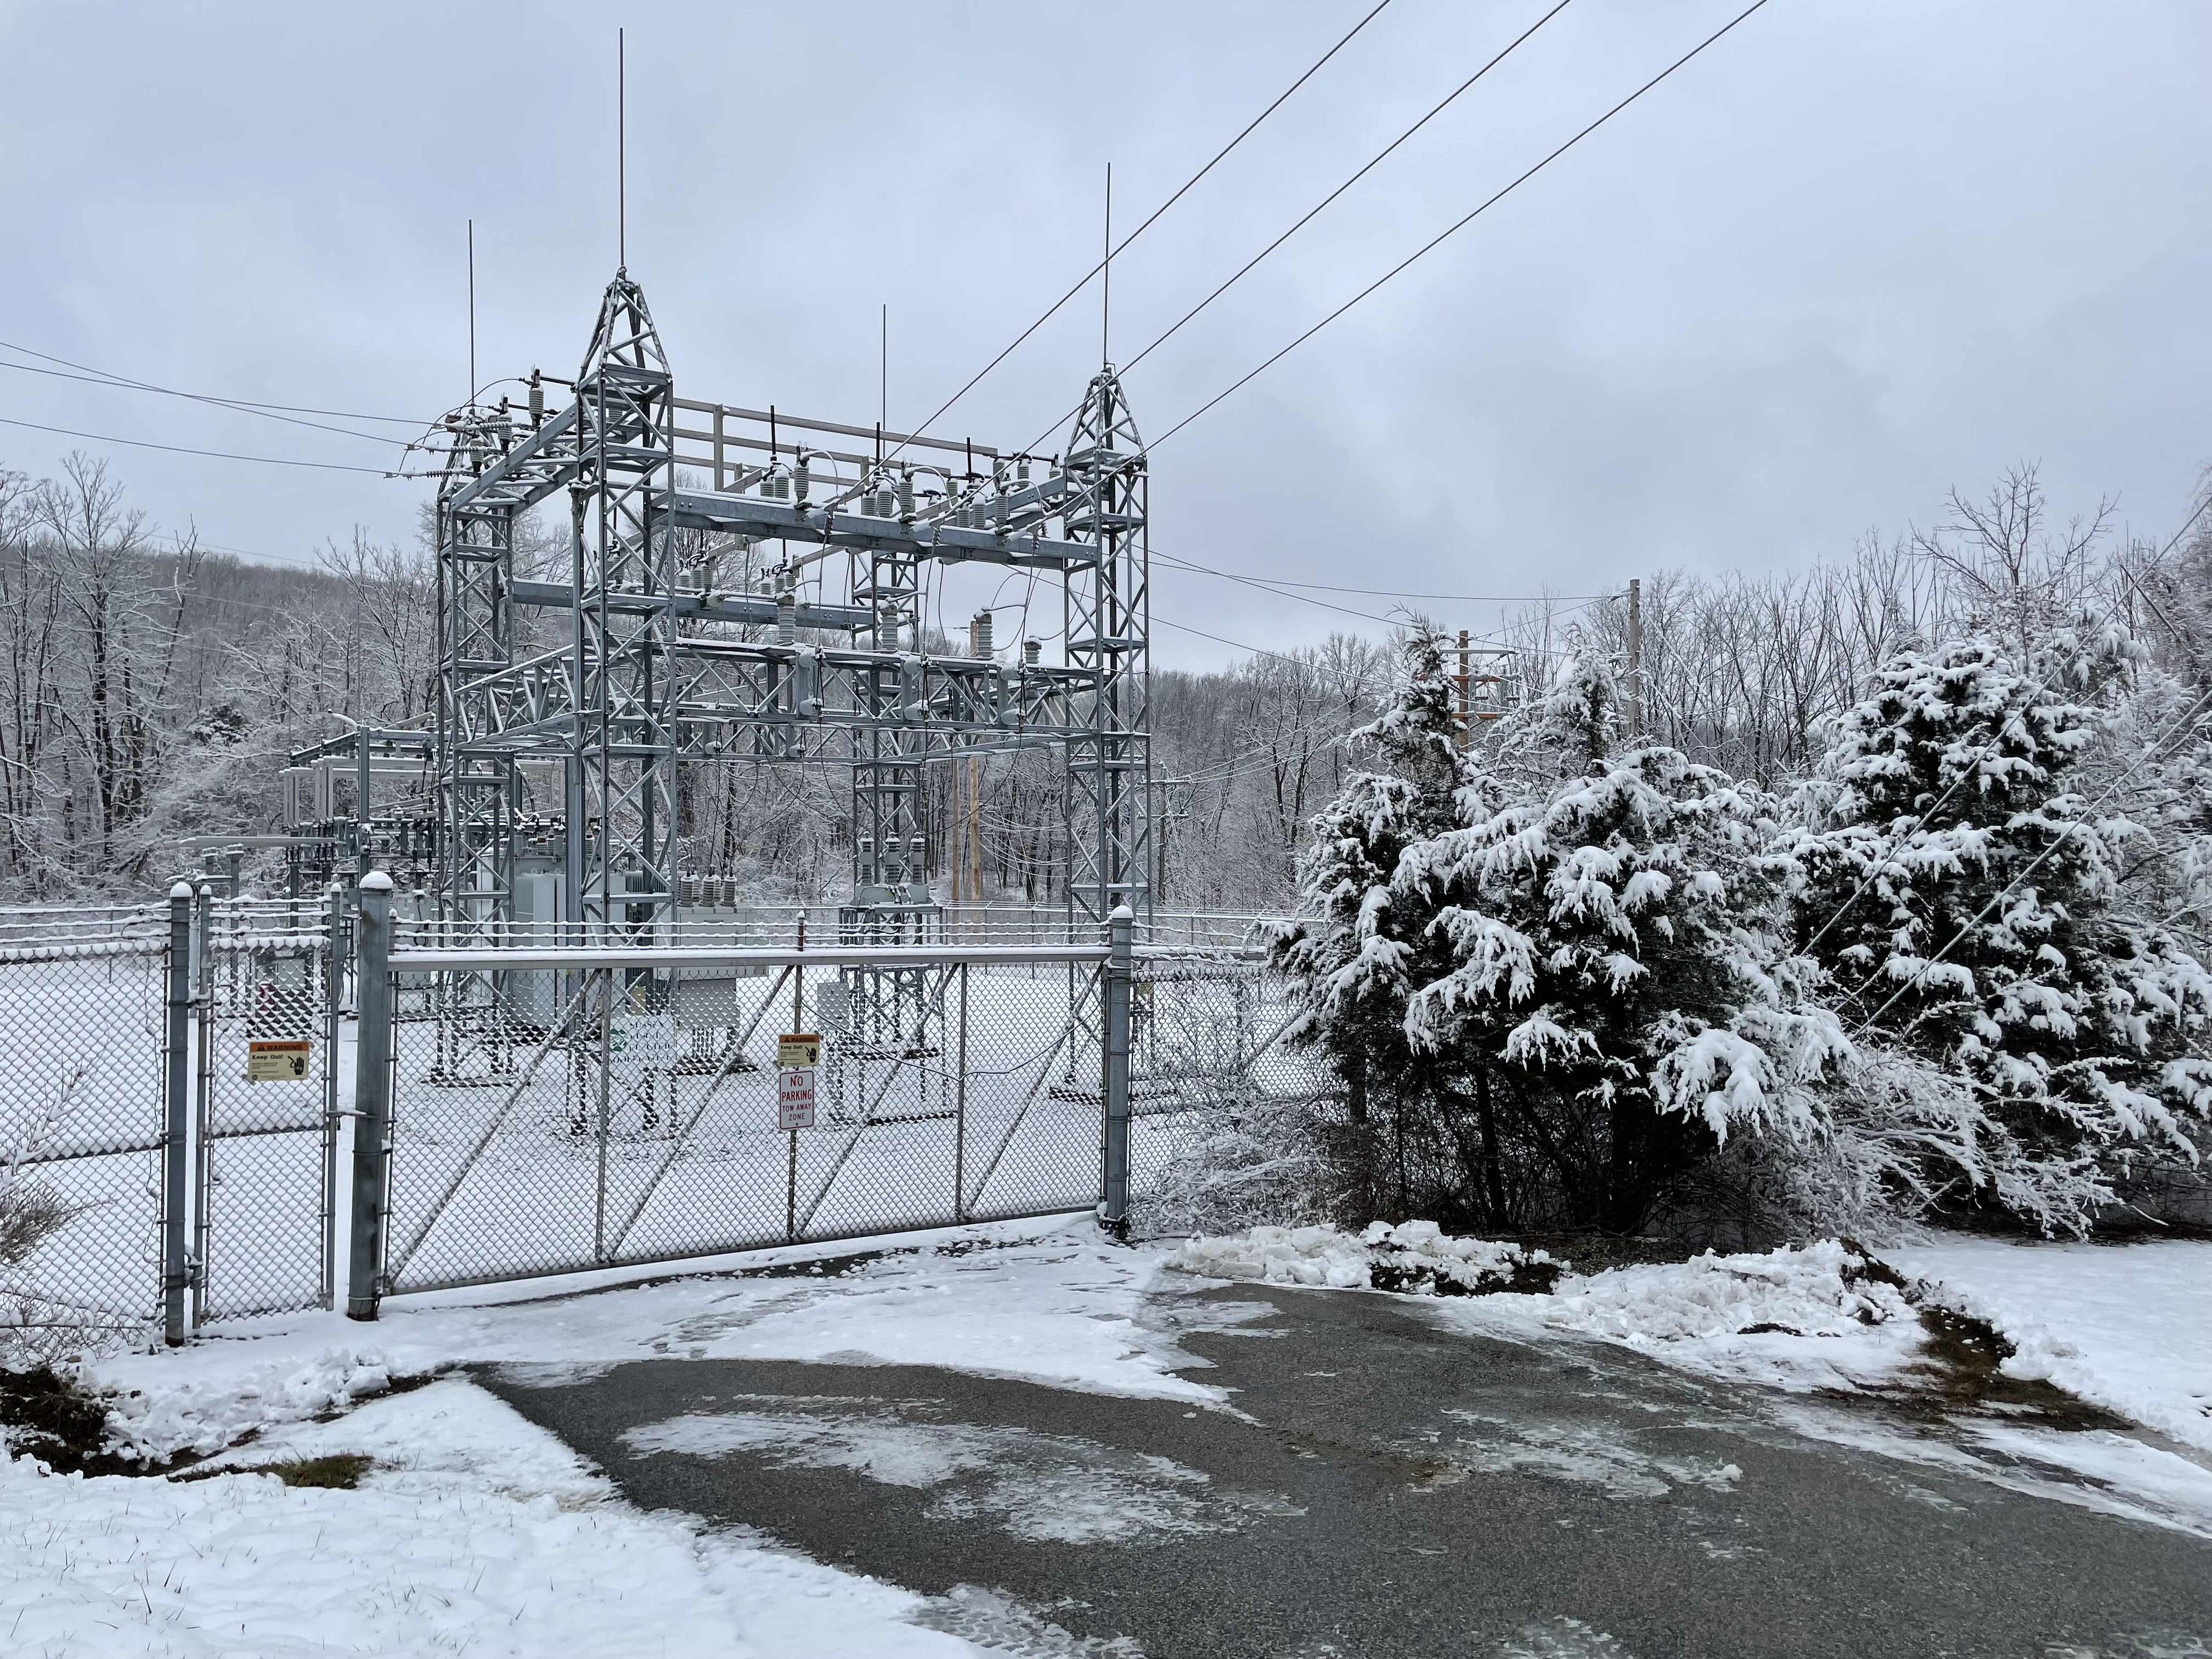 Photo of a Sussex Rural Electric Cooperative substation following a winter snowfall